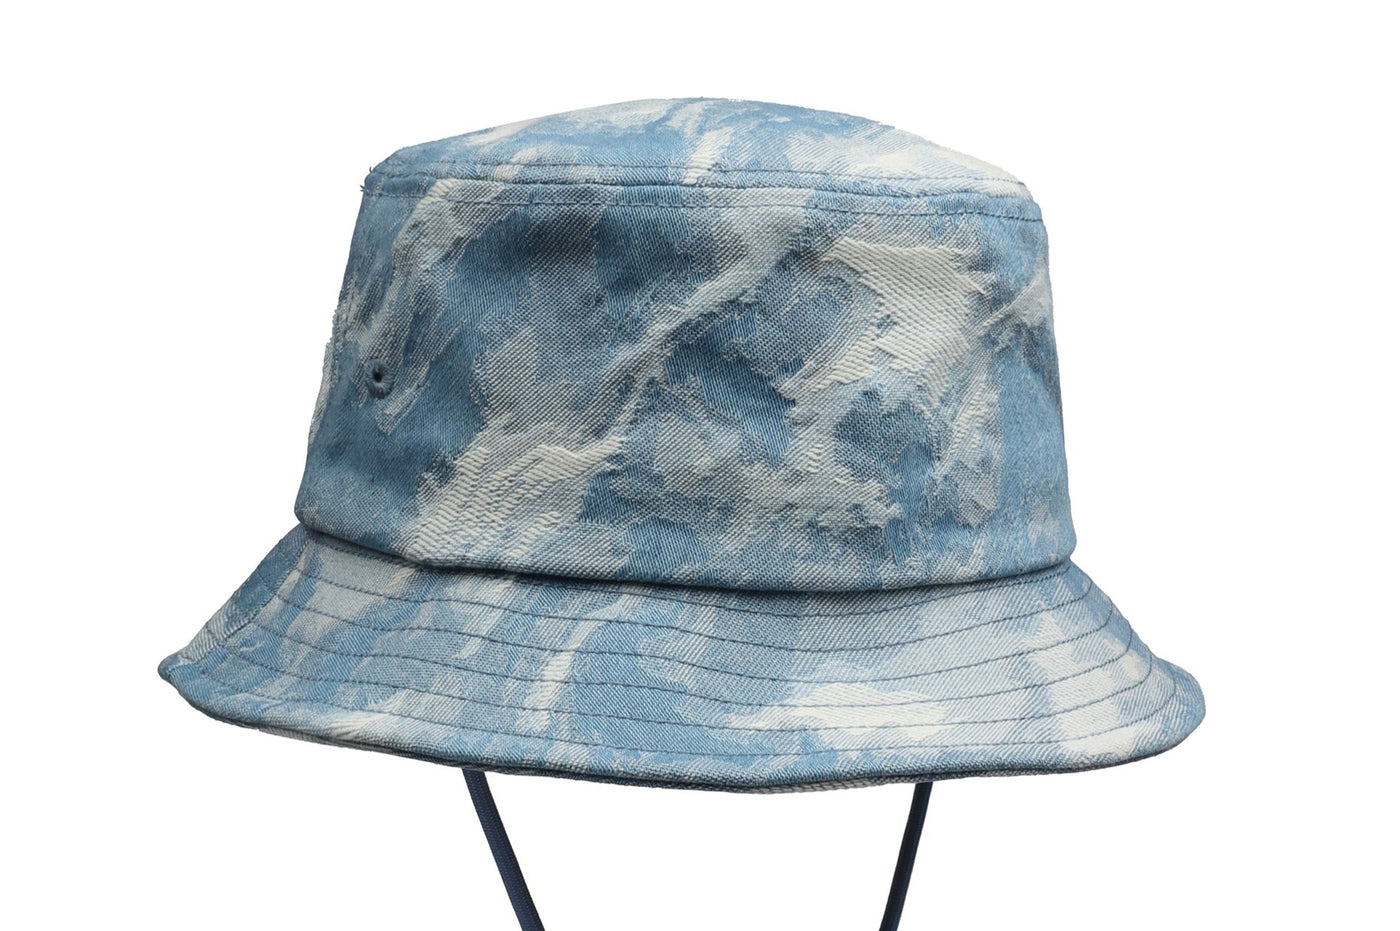 Hatphile Washed Denim Bucket Hats with Strings